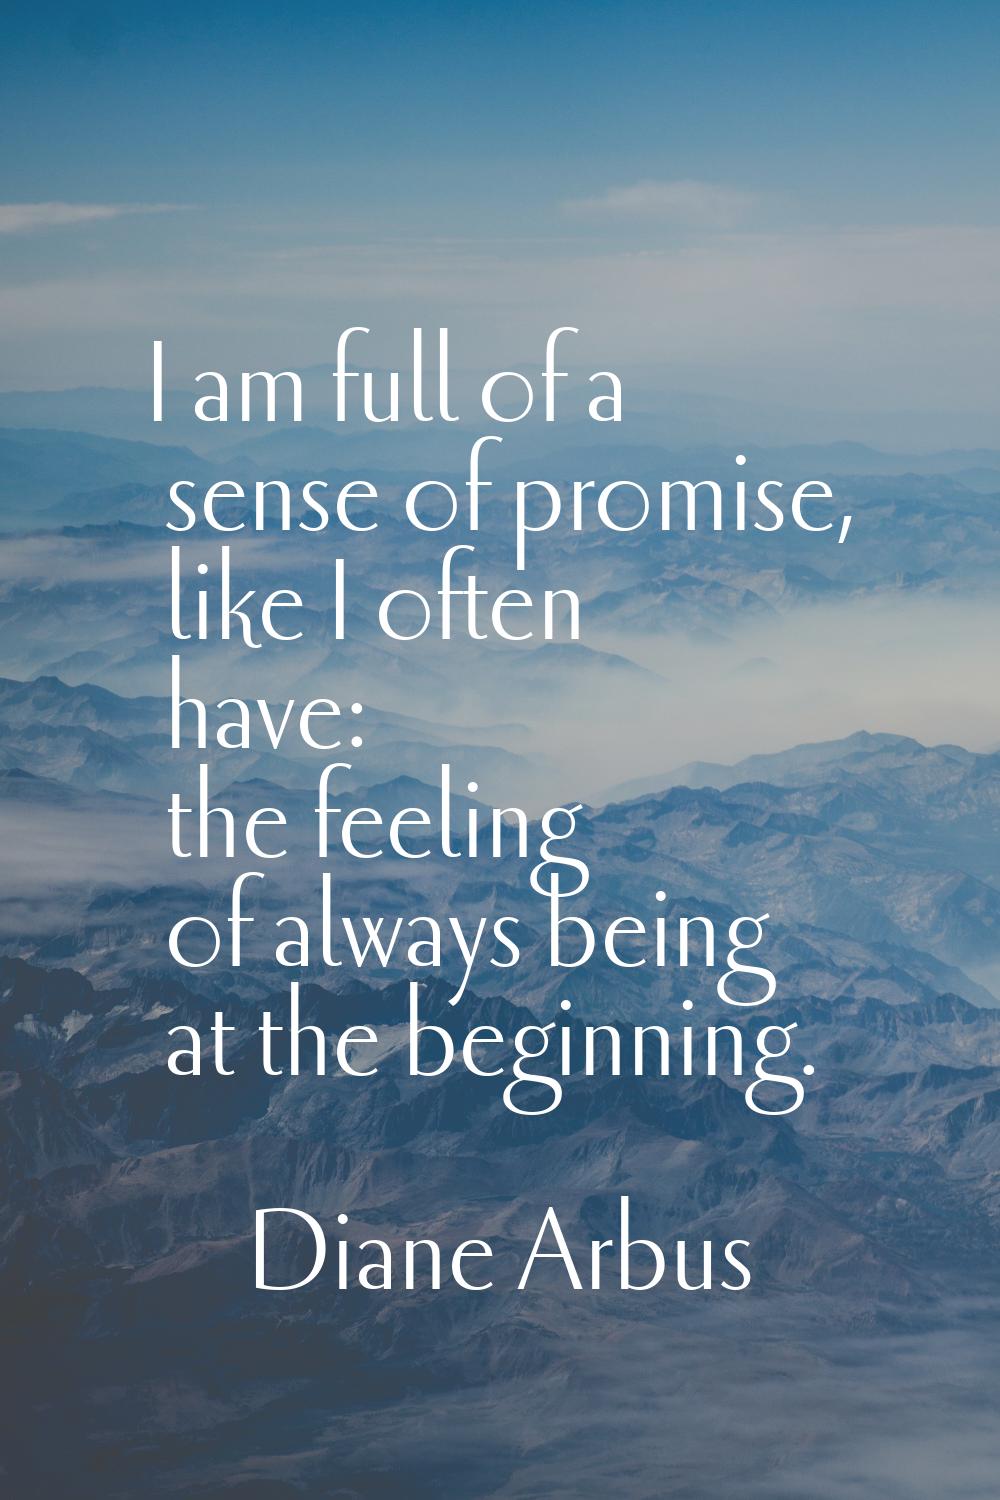 I am full of a sense of promise, like I often have: the feeling of always being at the beginning.